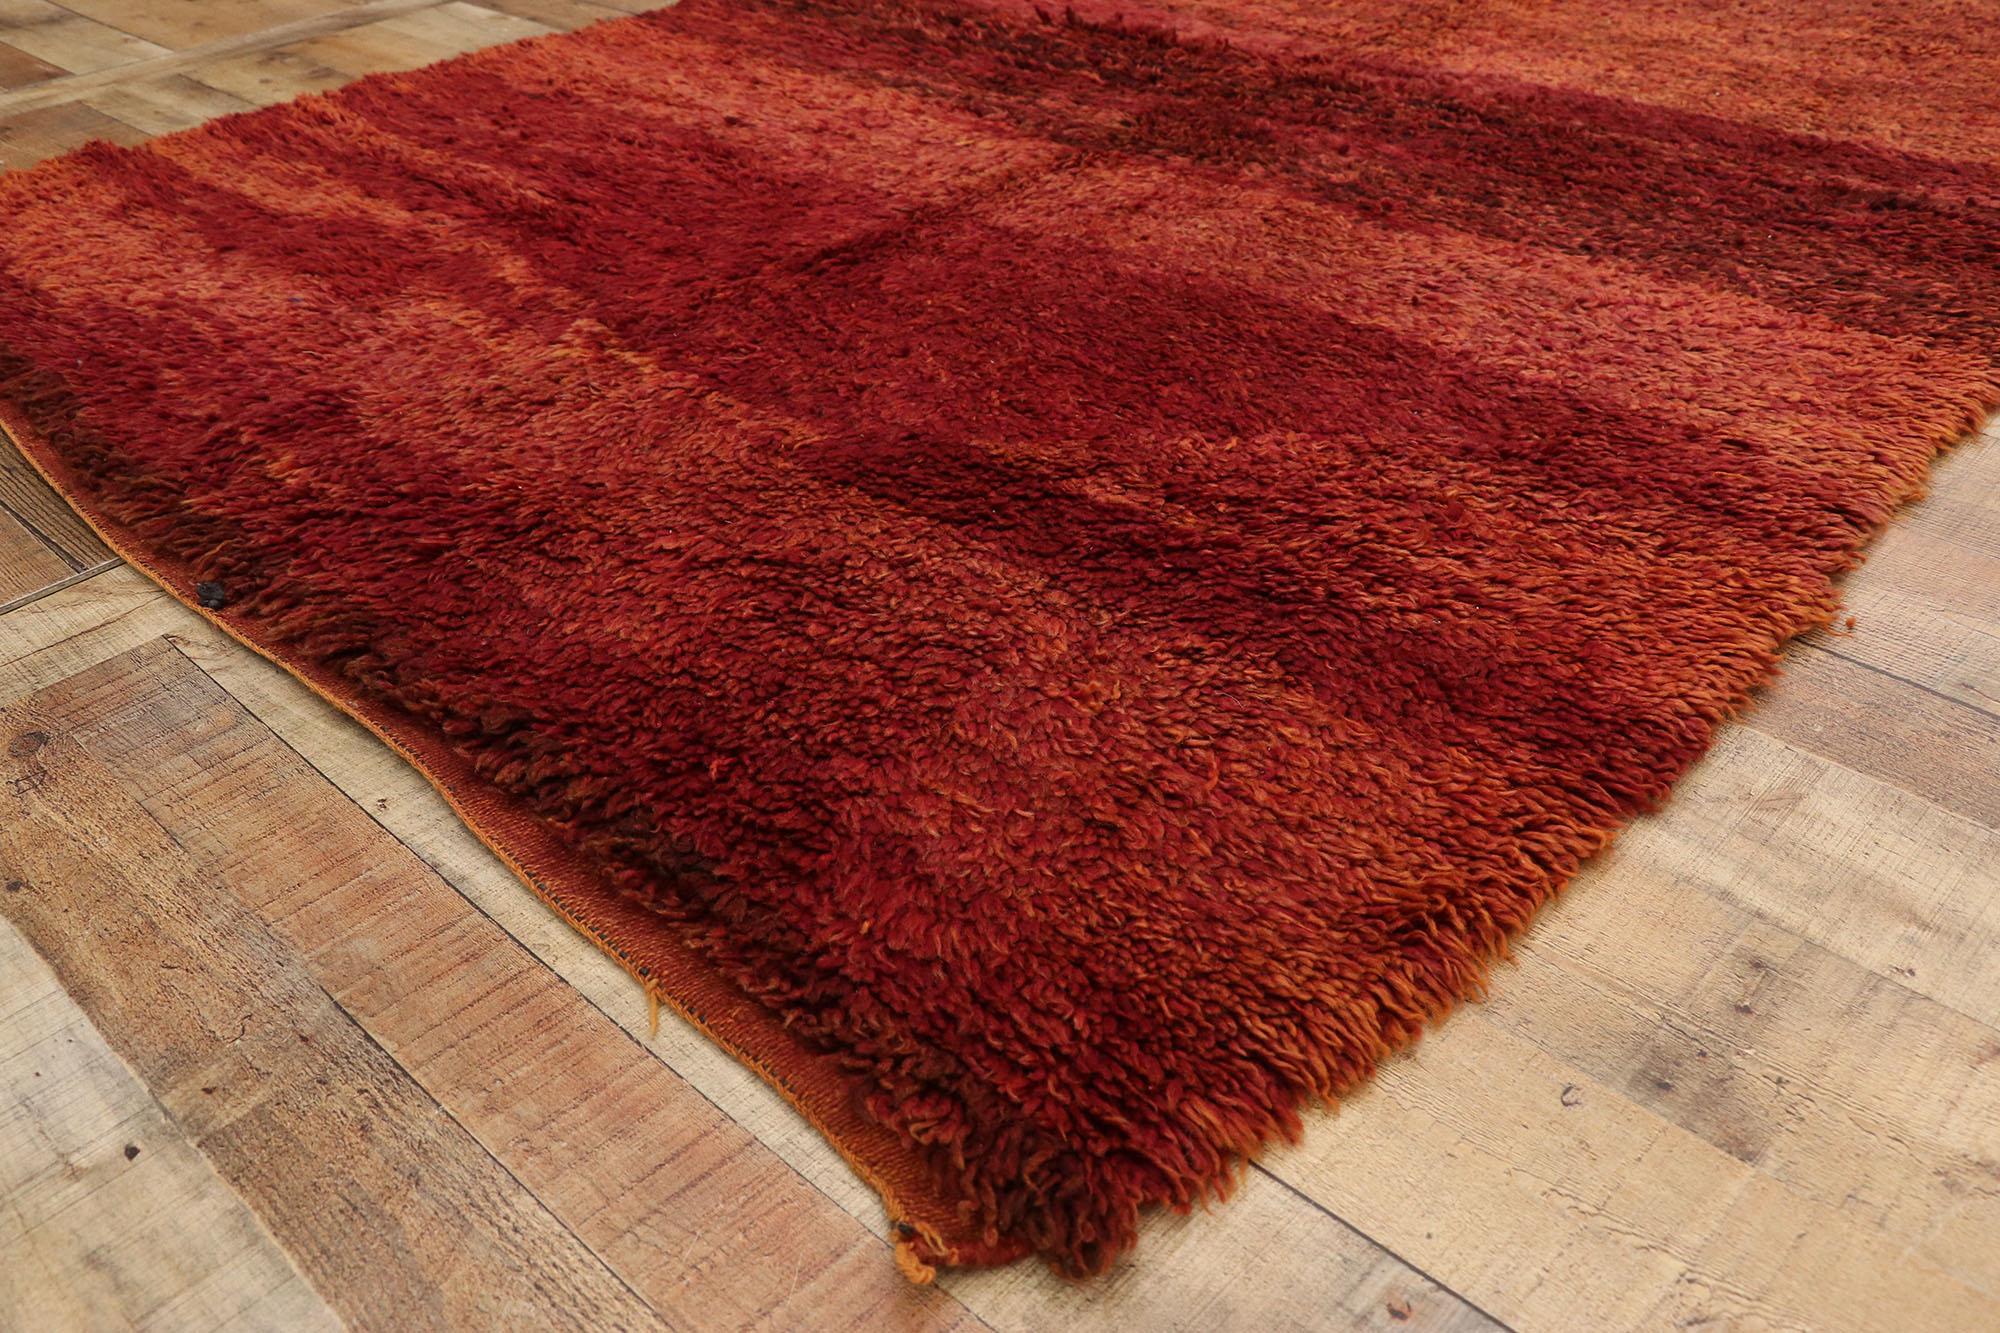 Wool Vintage Berber Moroccan Rug with Warm, Mid-Century Modern Style For Sale